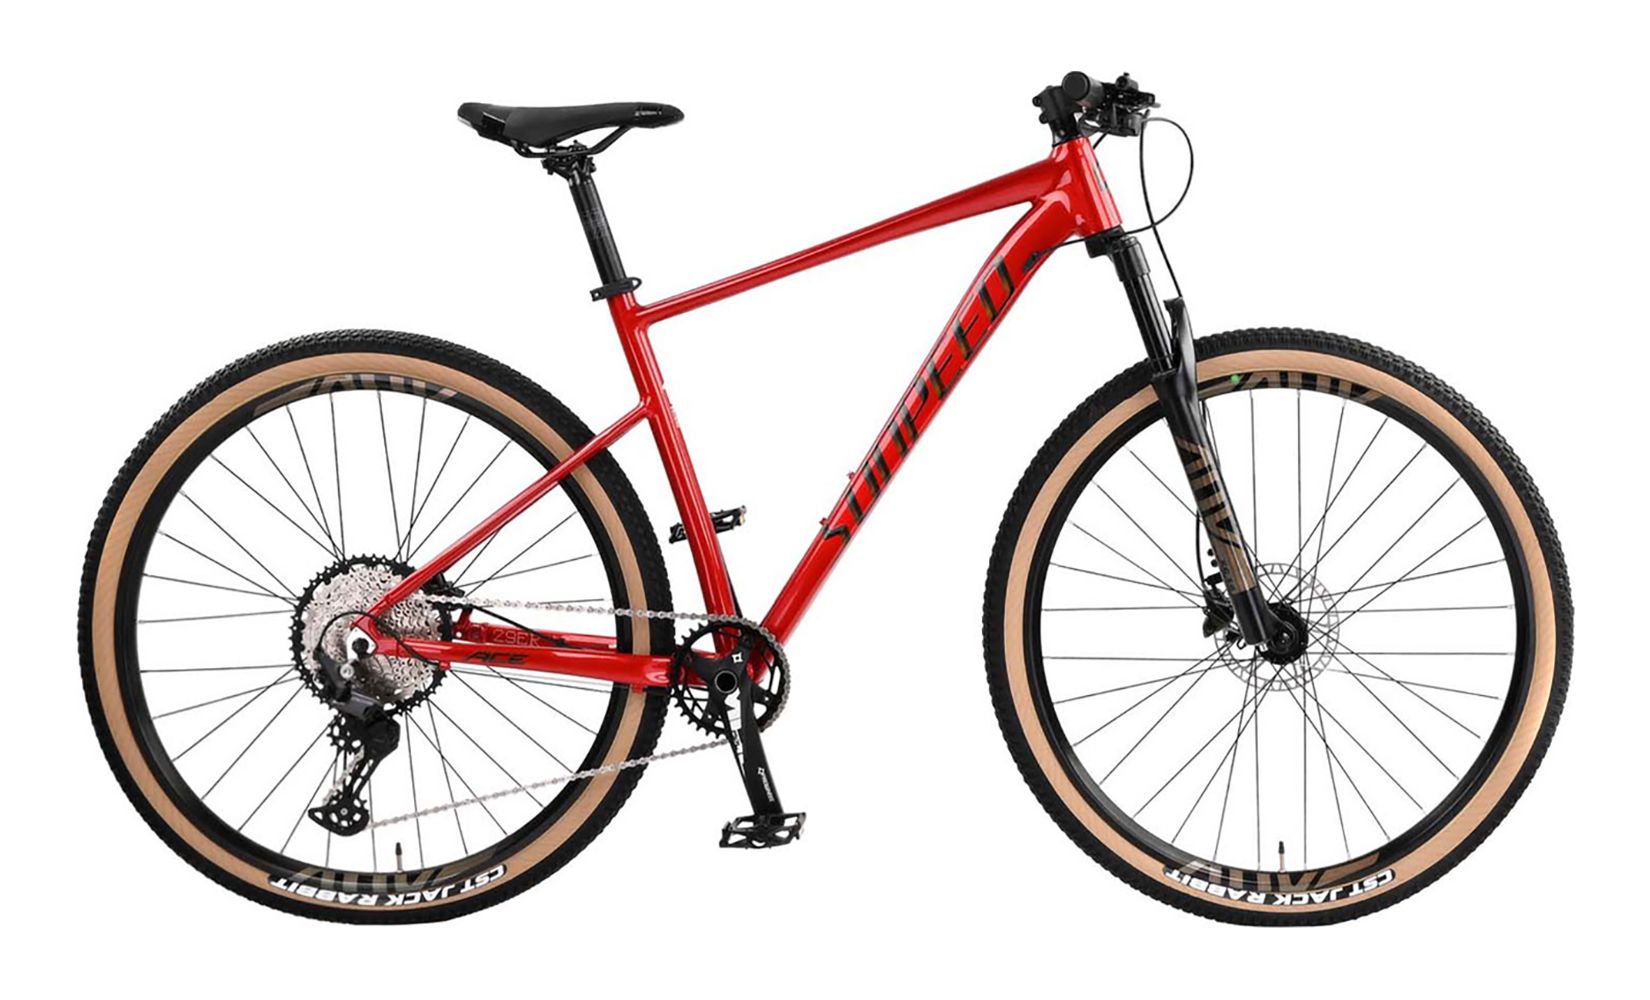  Sunpeed Ace 27.5 (Red/)